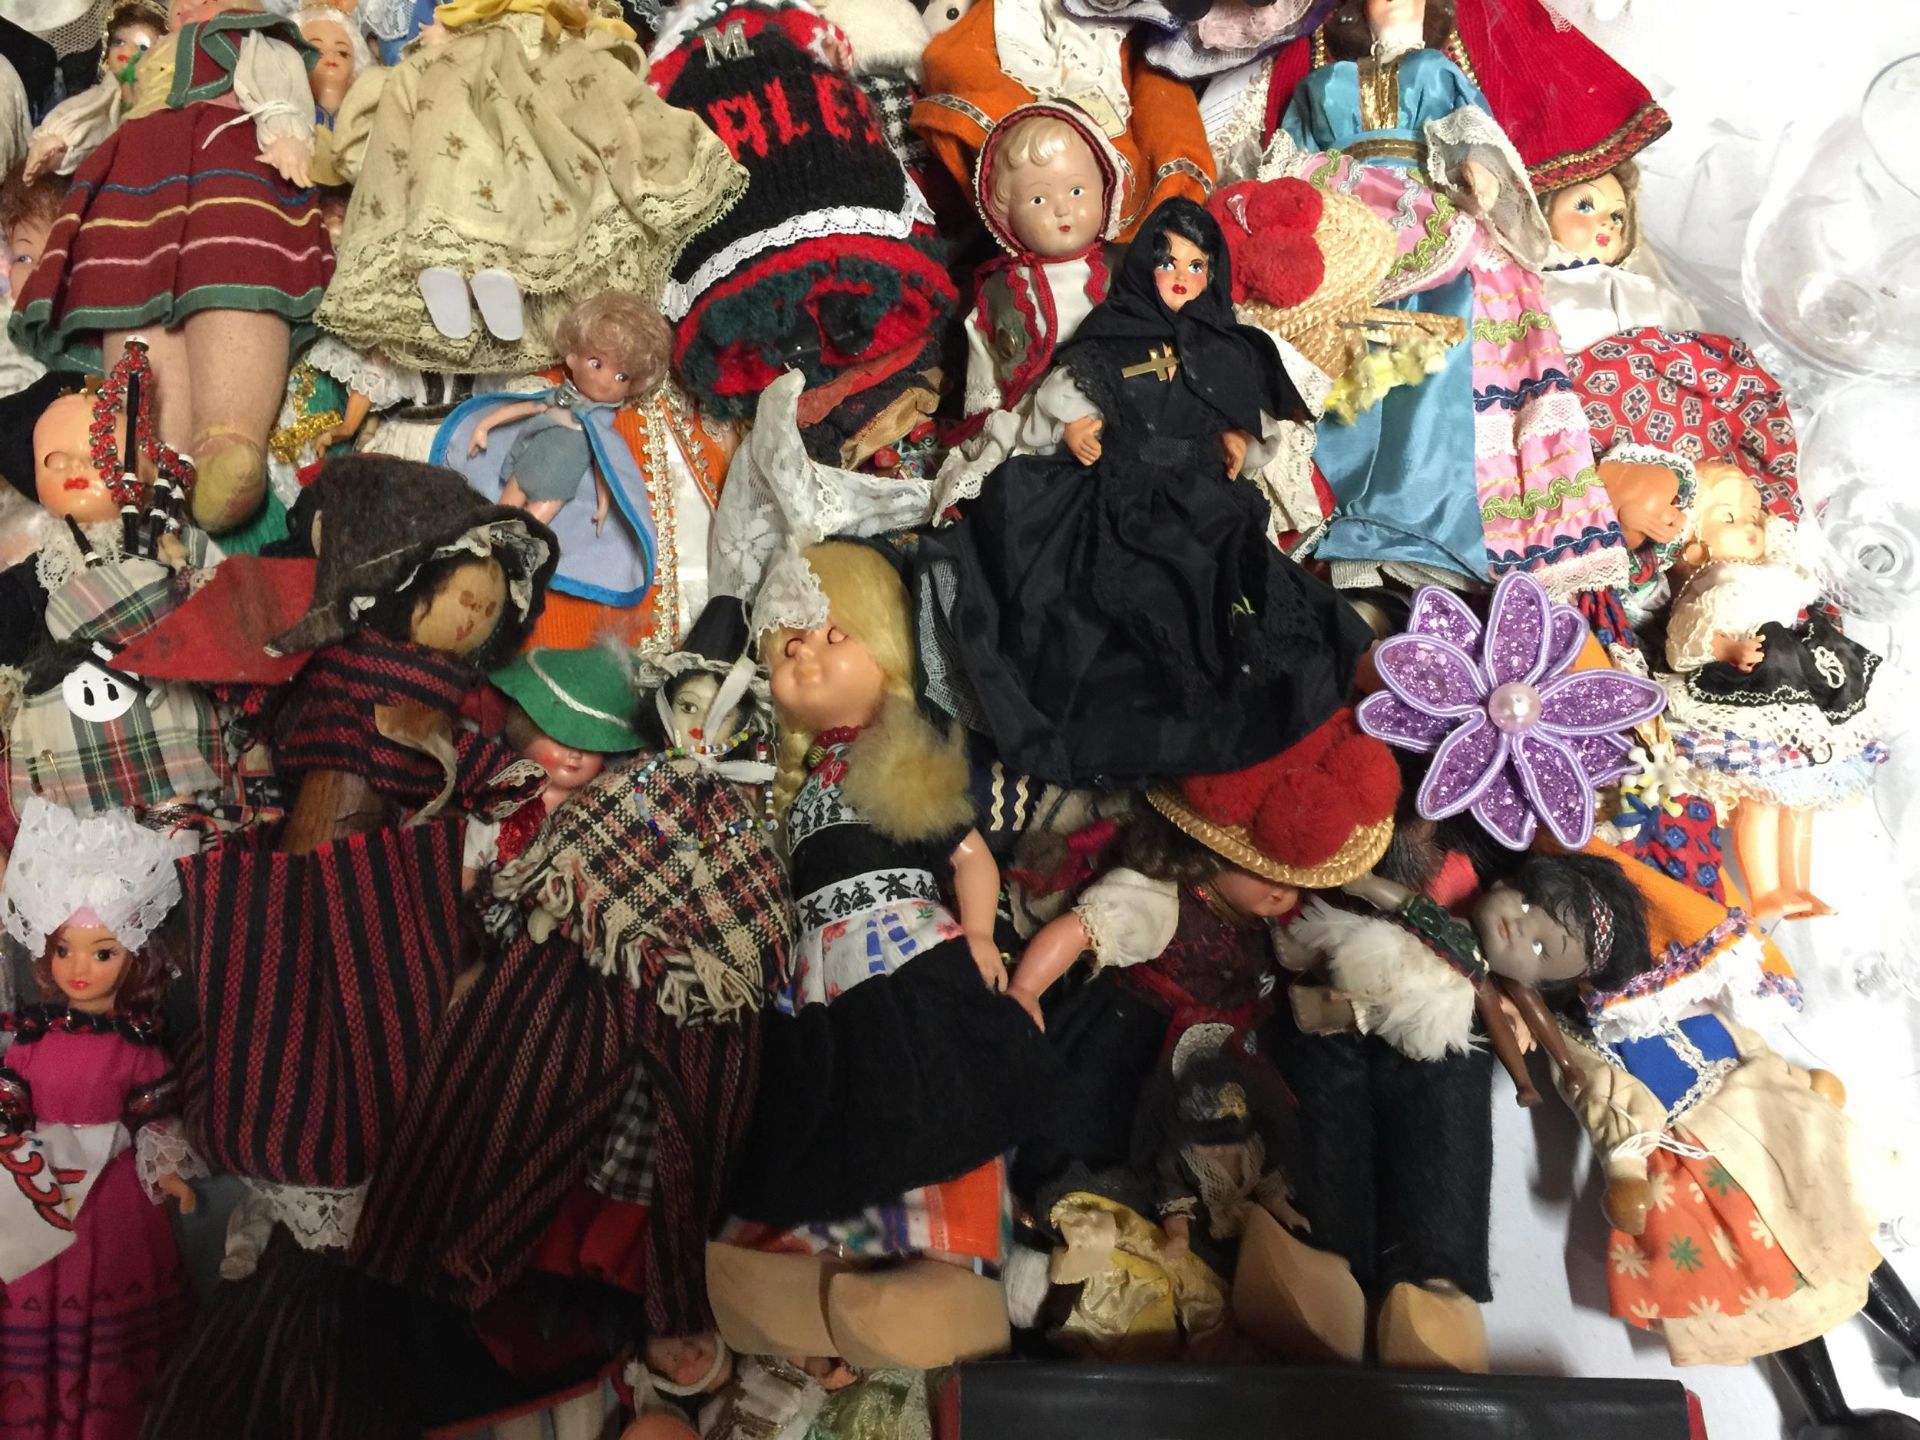 A LARGE QUANTITY OF COLLECTABLE DOLLS IN VARIOUS COSTUMES - Image 3 of 6